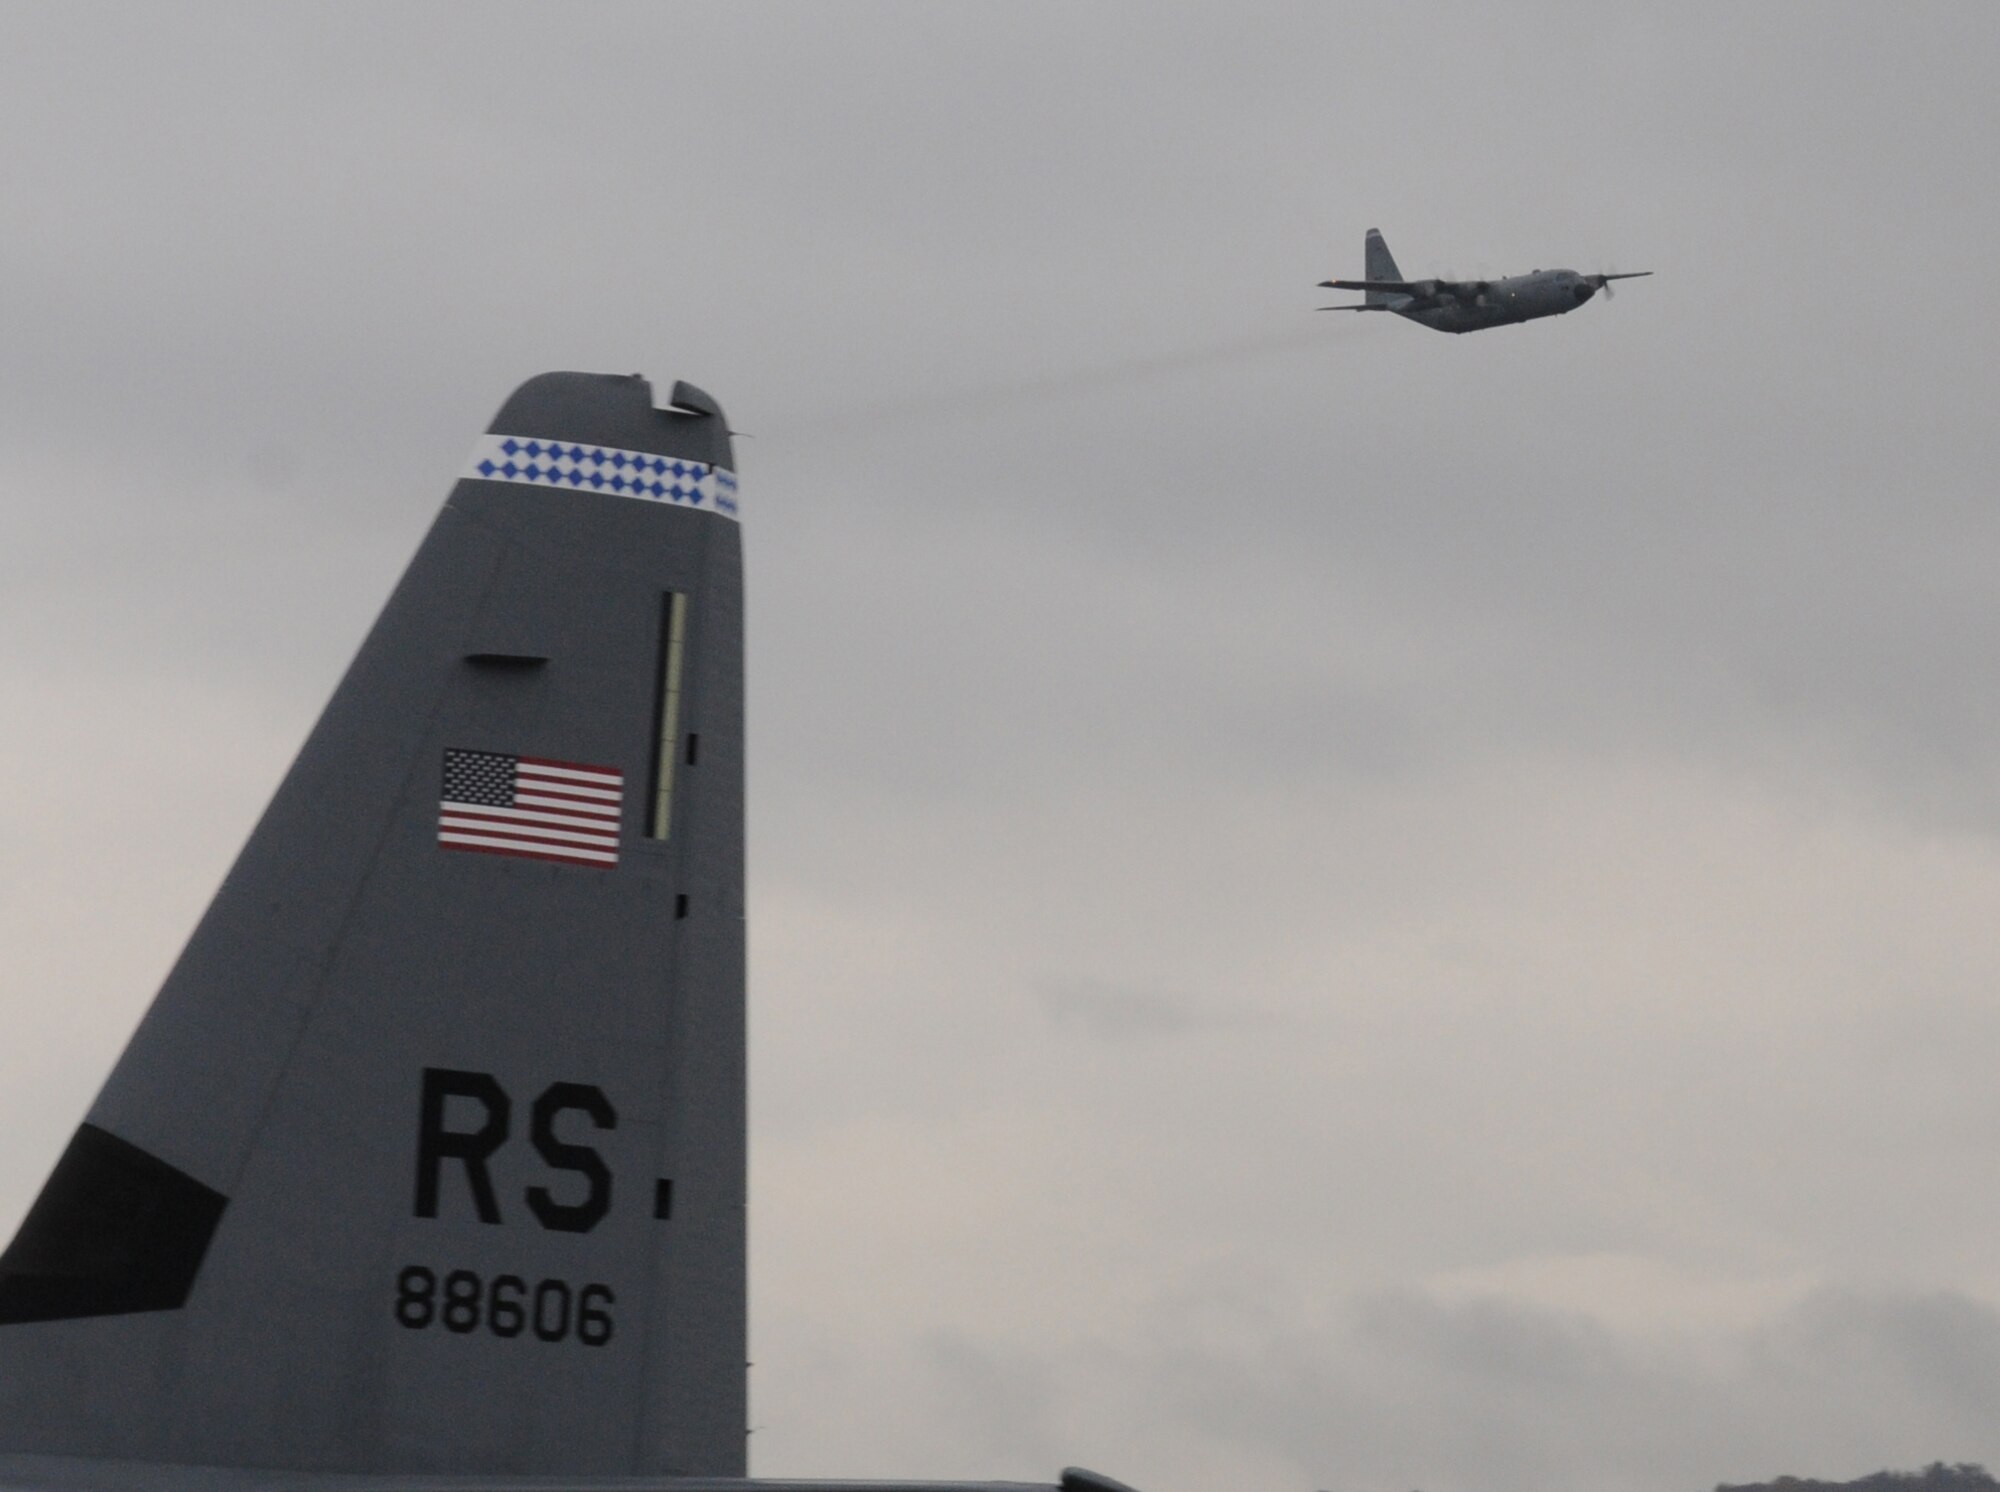 Ramstein Air Base's final C-130E Hercules performs a fly-by over the flightline to conclude its departure ceremony, Ramstein Air Base, Germany, Nov. 2, 2009. The C-130E Hercules has provided more than 40 years of airpower to U.S. Air Forces in Europe, and is being replaced with the new C-130J Super Hercules as part of the revitalization of the Air Force fleet. (U.S. Air Force photo by Airman 1st Class Caleb Pierce)